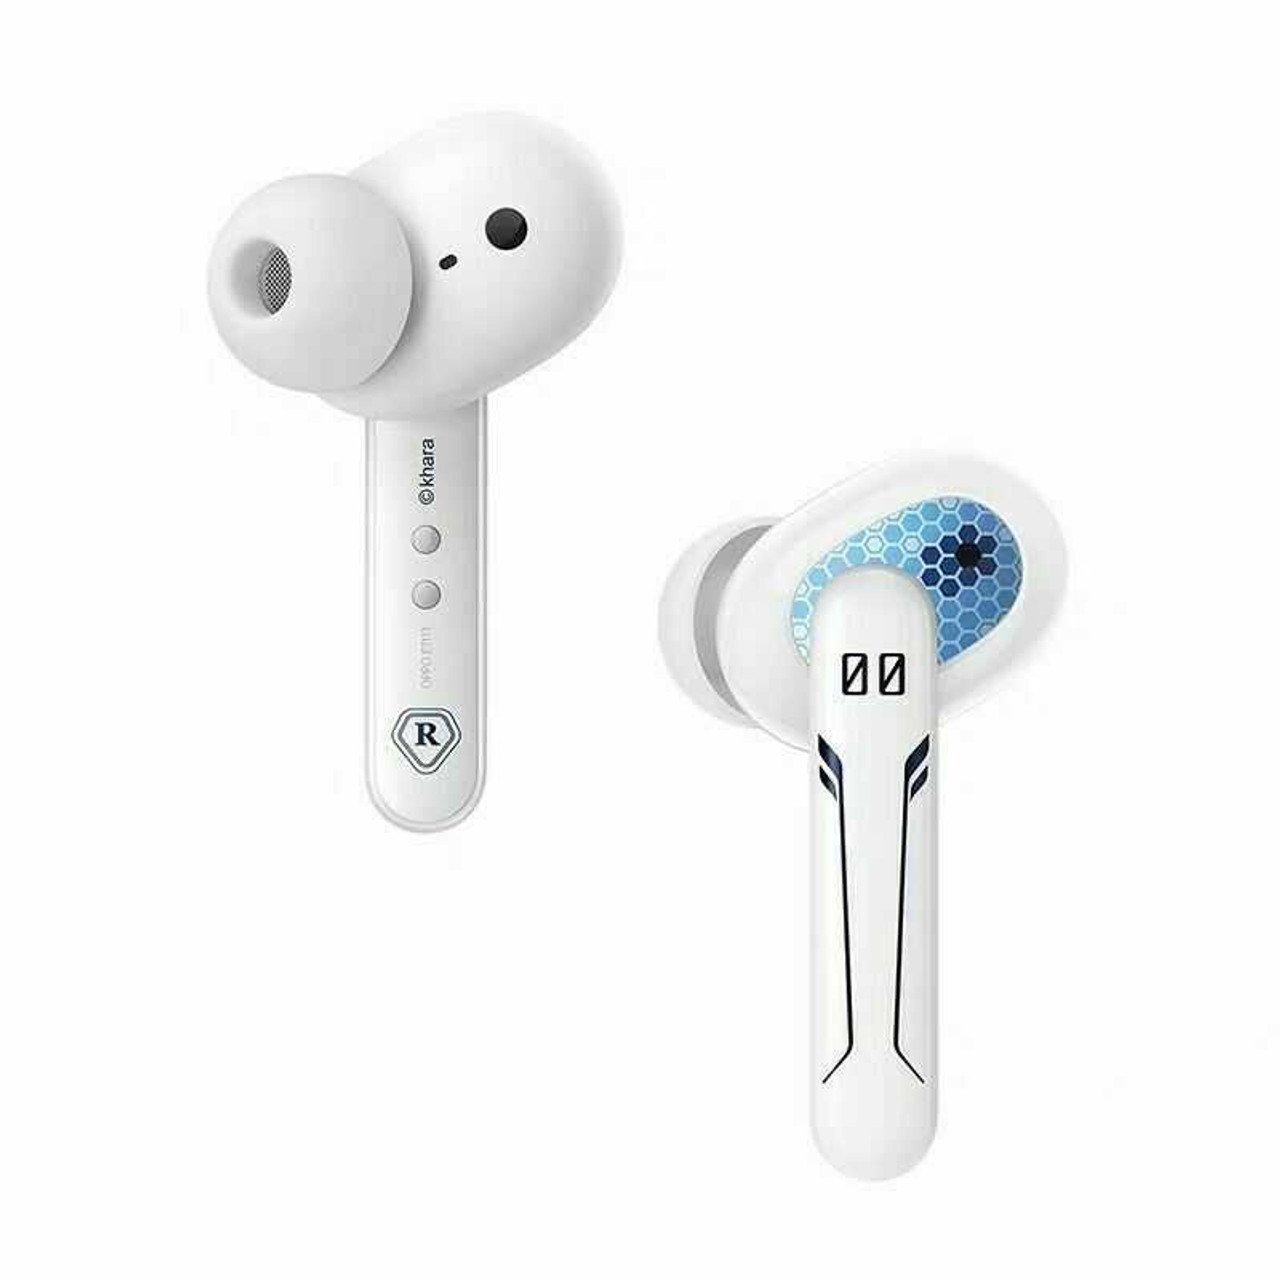 AURICULARES OPPO IMOO EAR-CARE